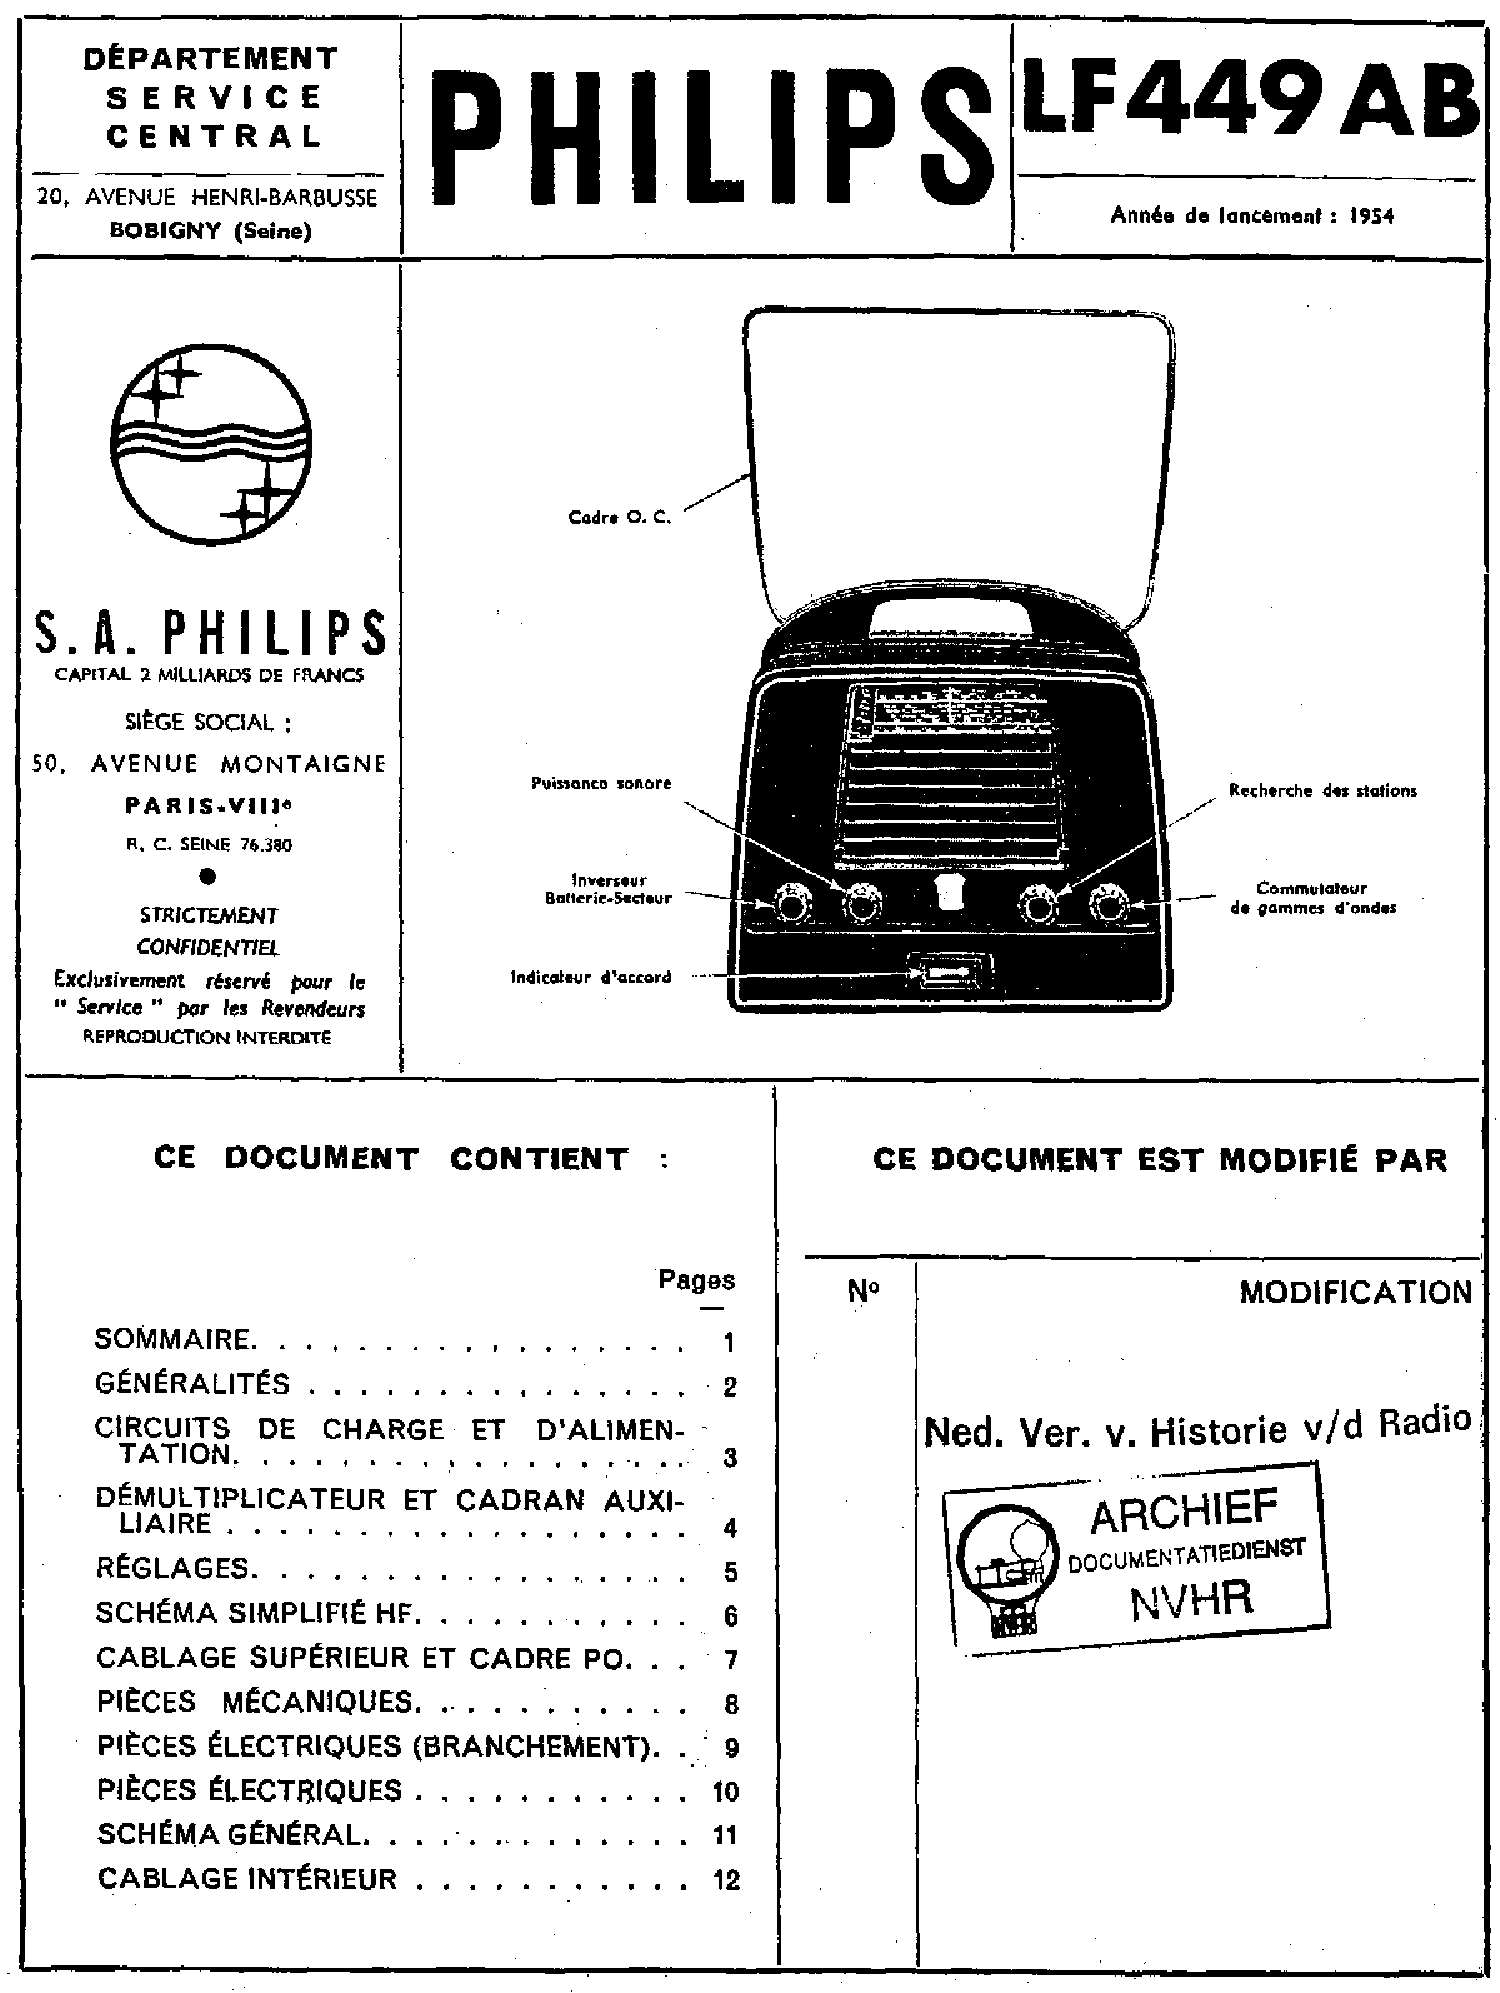 PHILIPS LF449AB AC RECEIVER 1954 SM service manual (1st page)